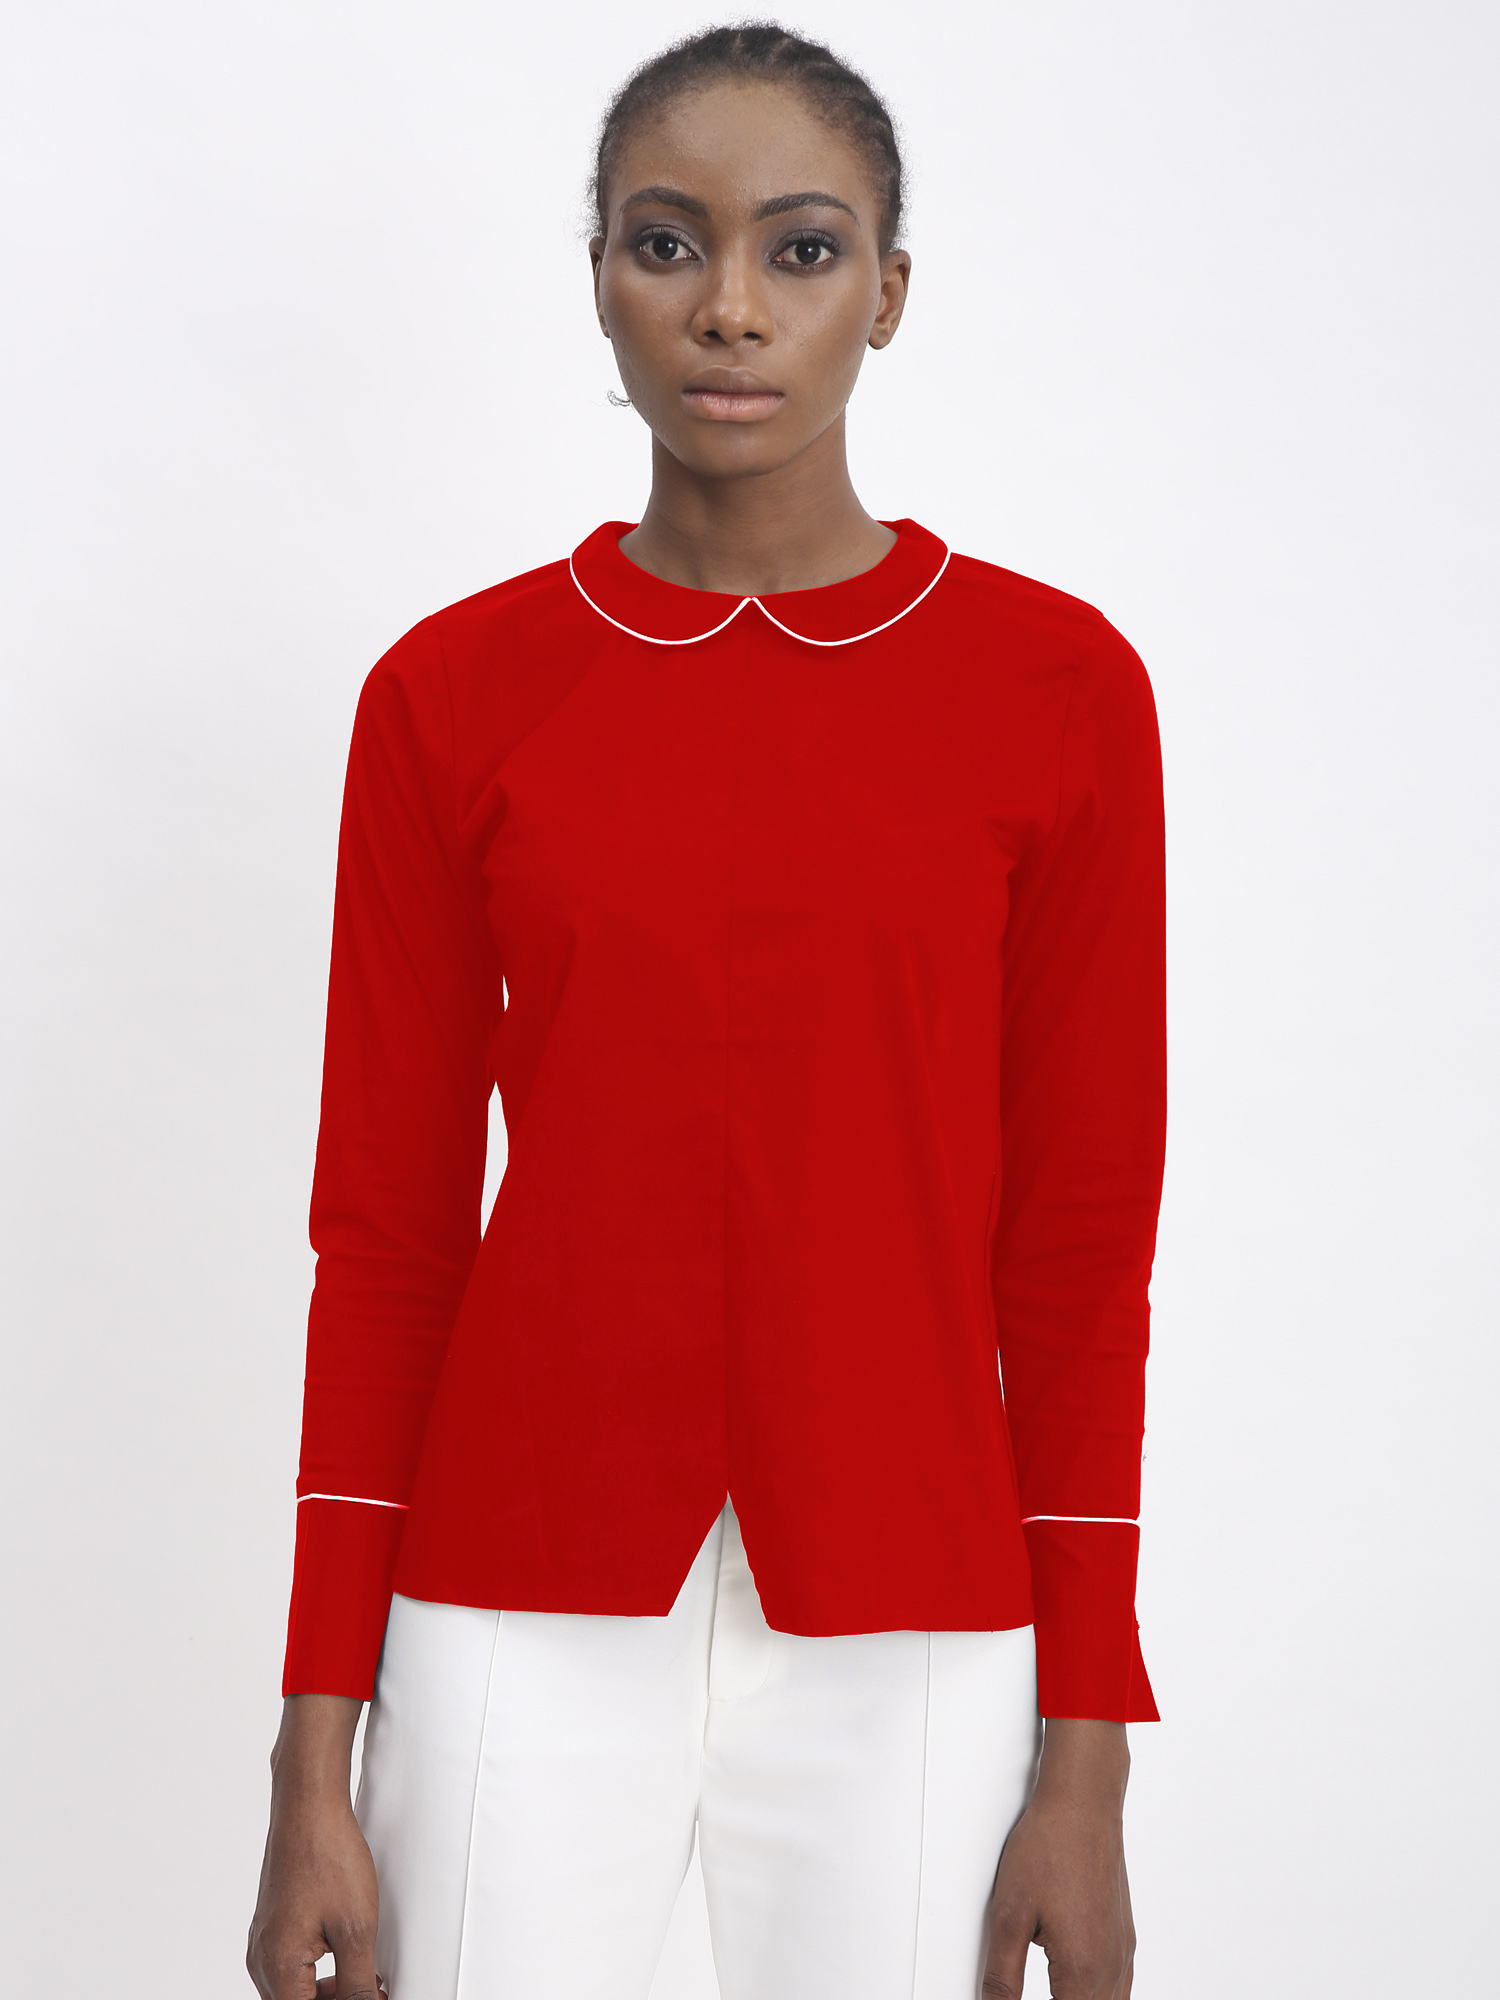 Peter-Pan Contrast Shirt Red - Front